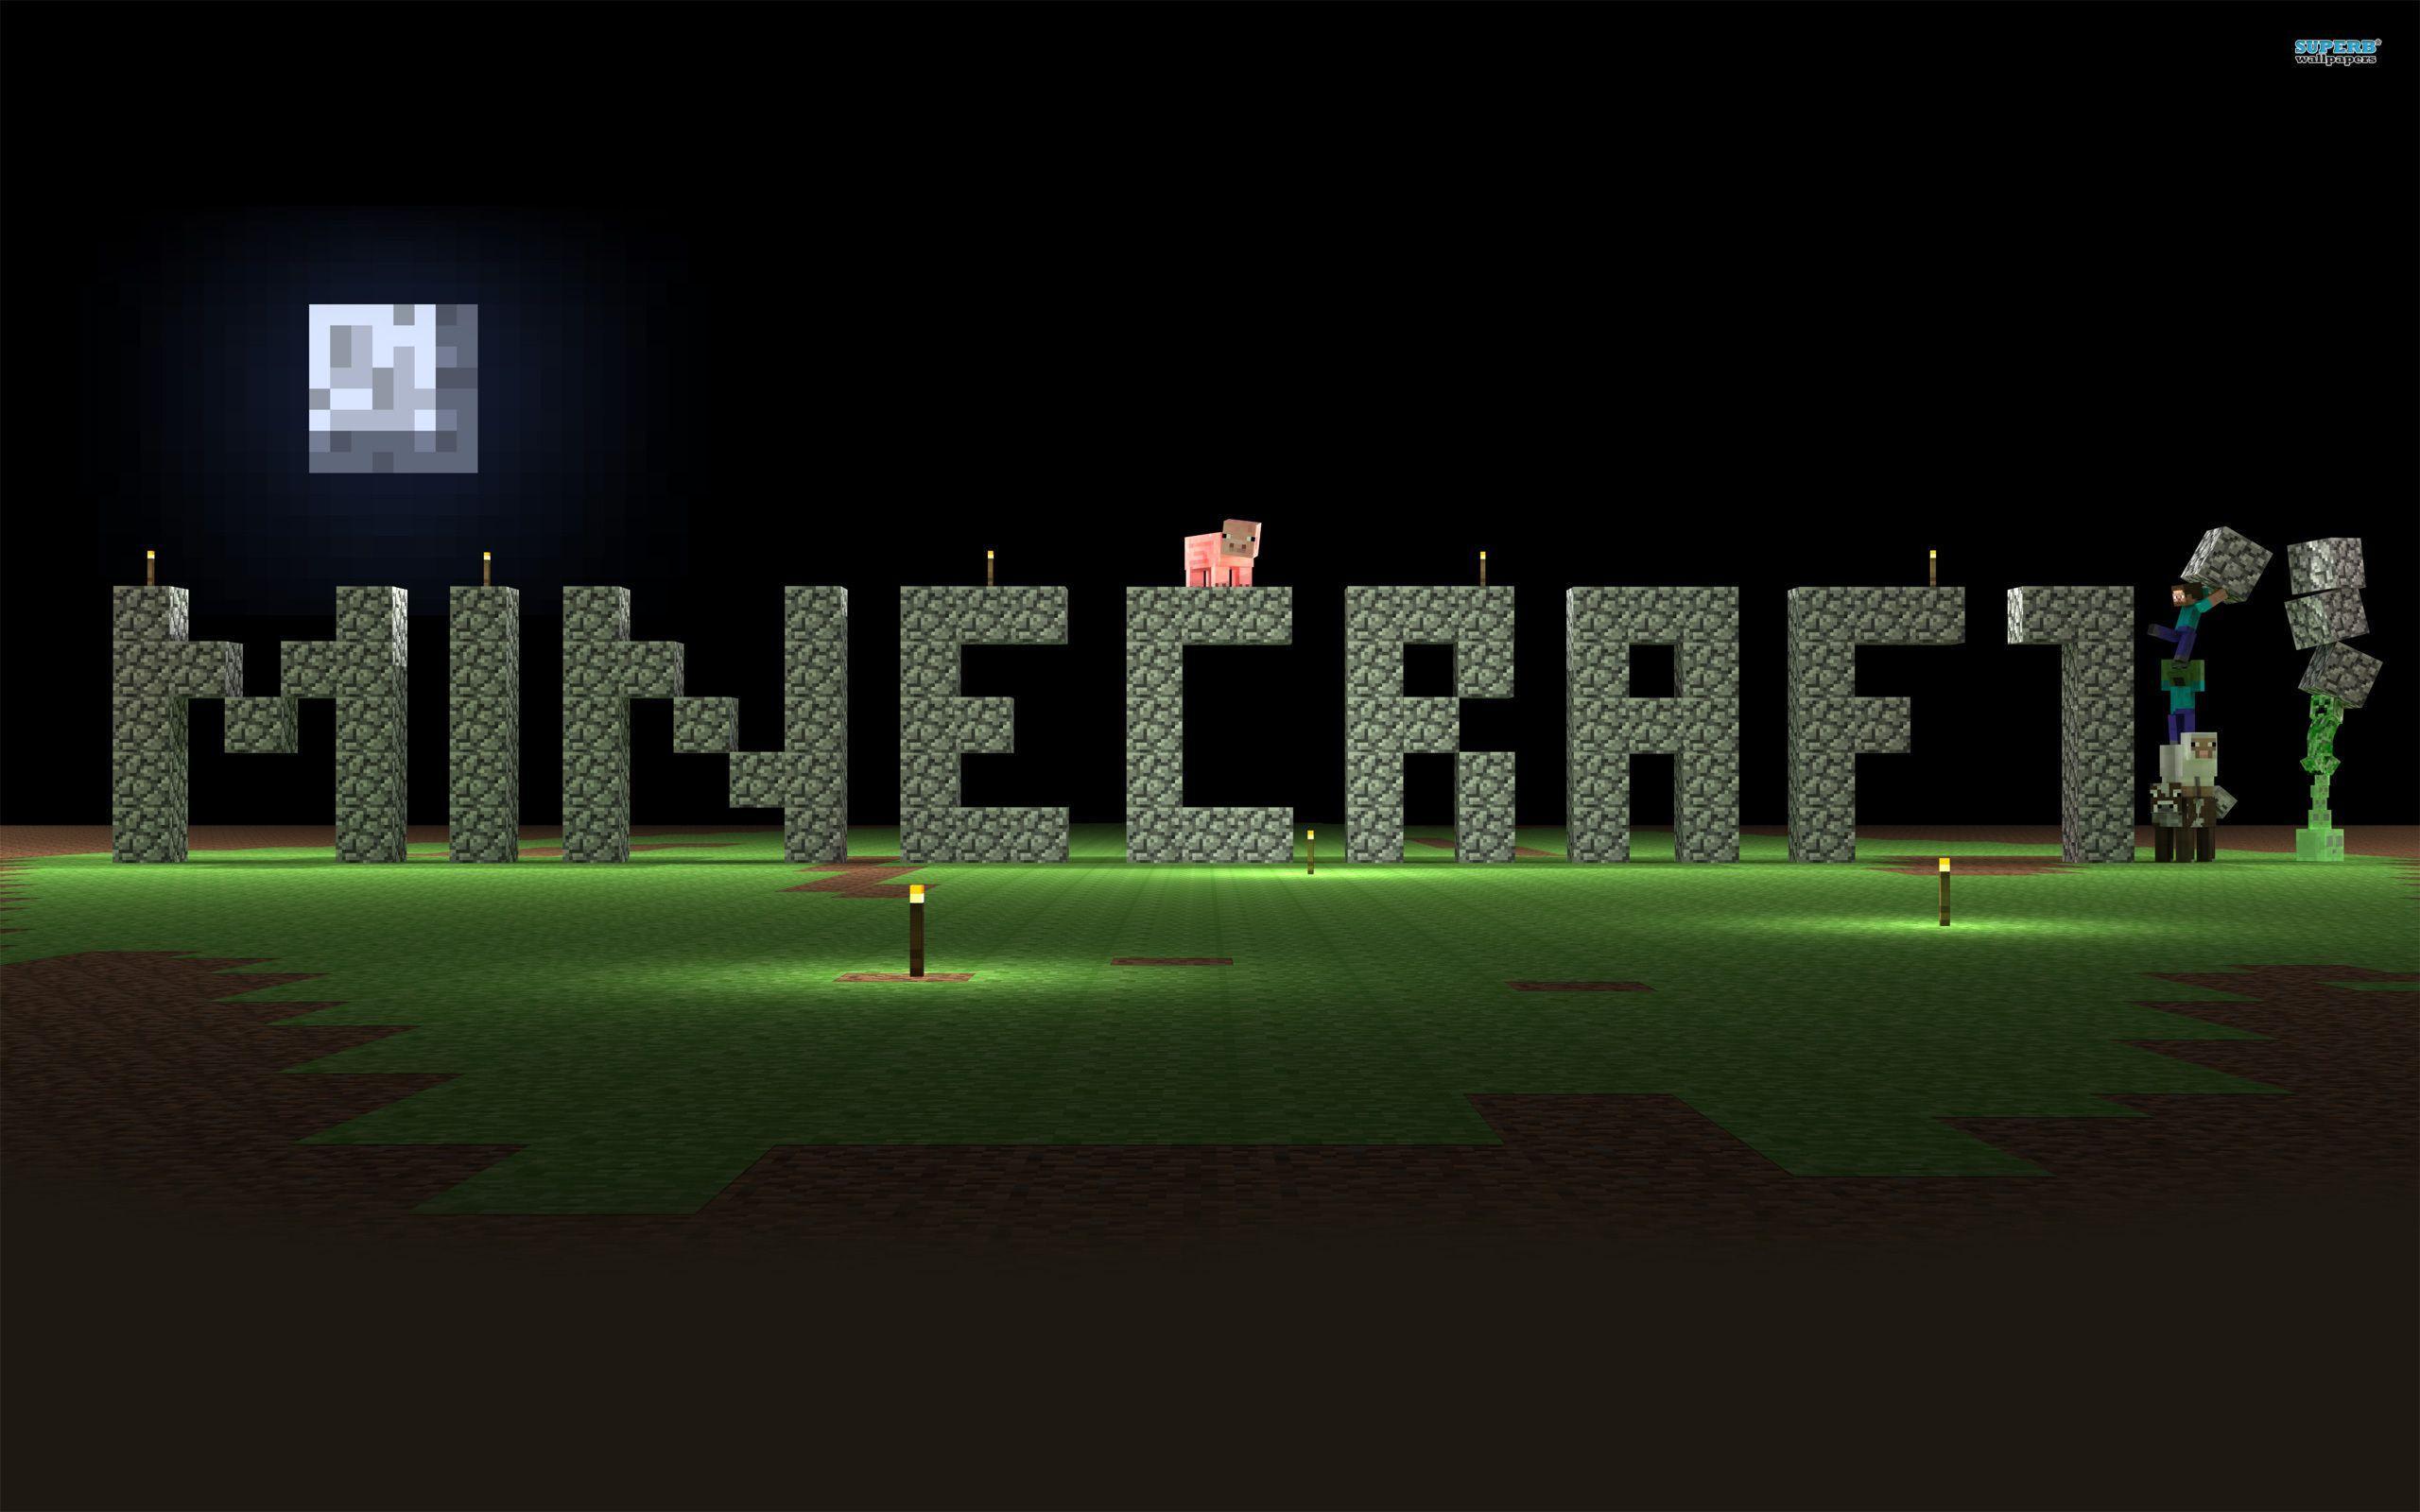 Wallpaper For > Awesome Minecraft Wallpaper For Desktop